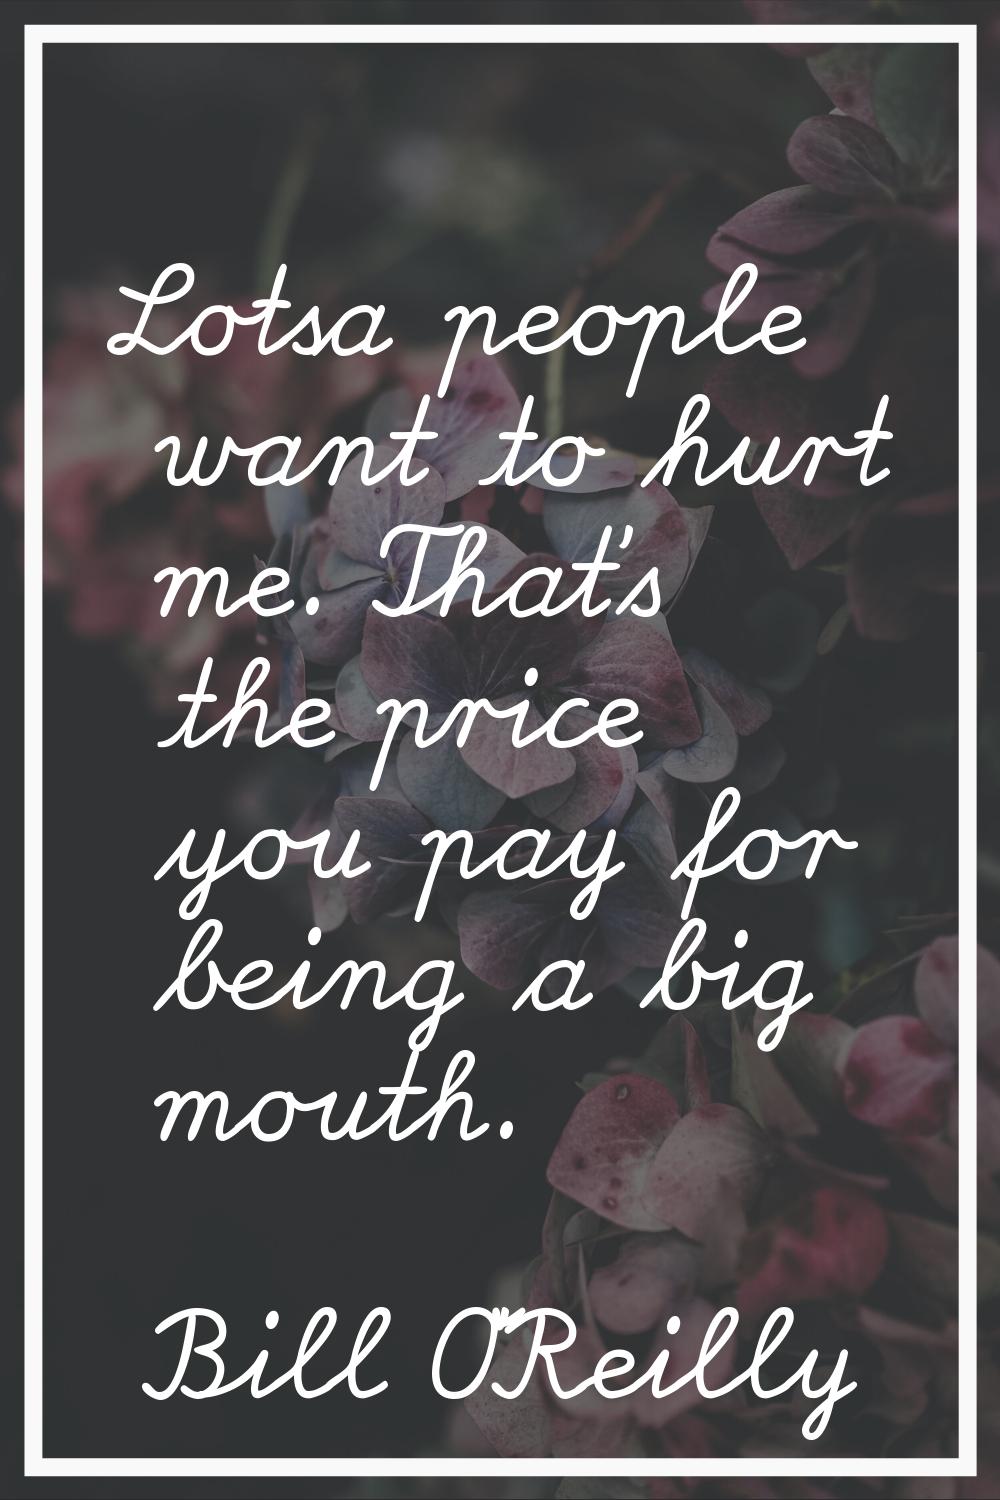 Lotsa people want to hurt me. That's the price you pay for being a big mouth.